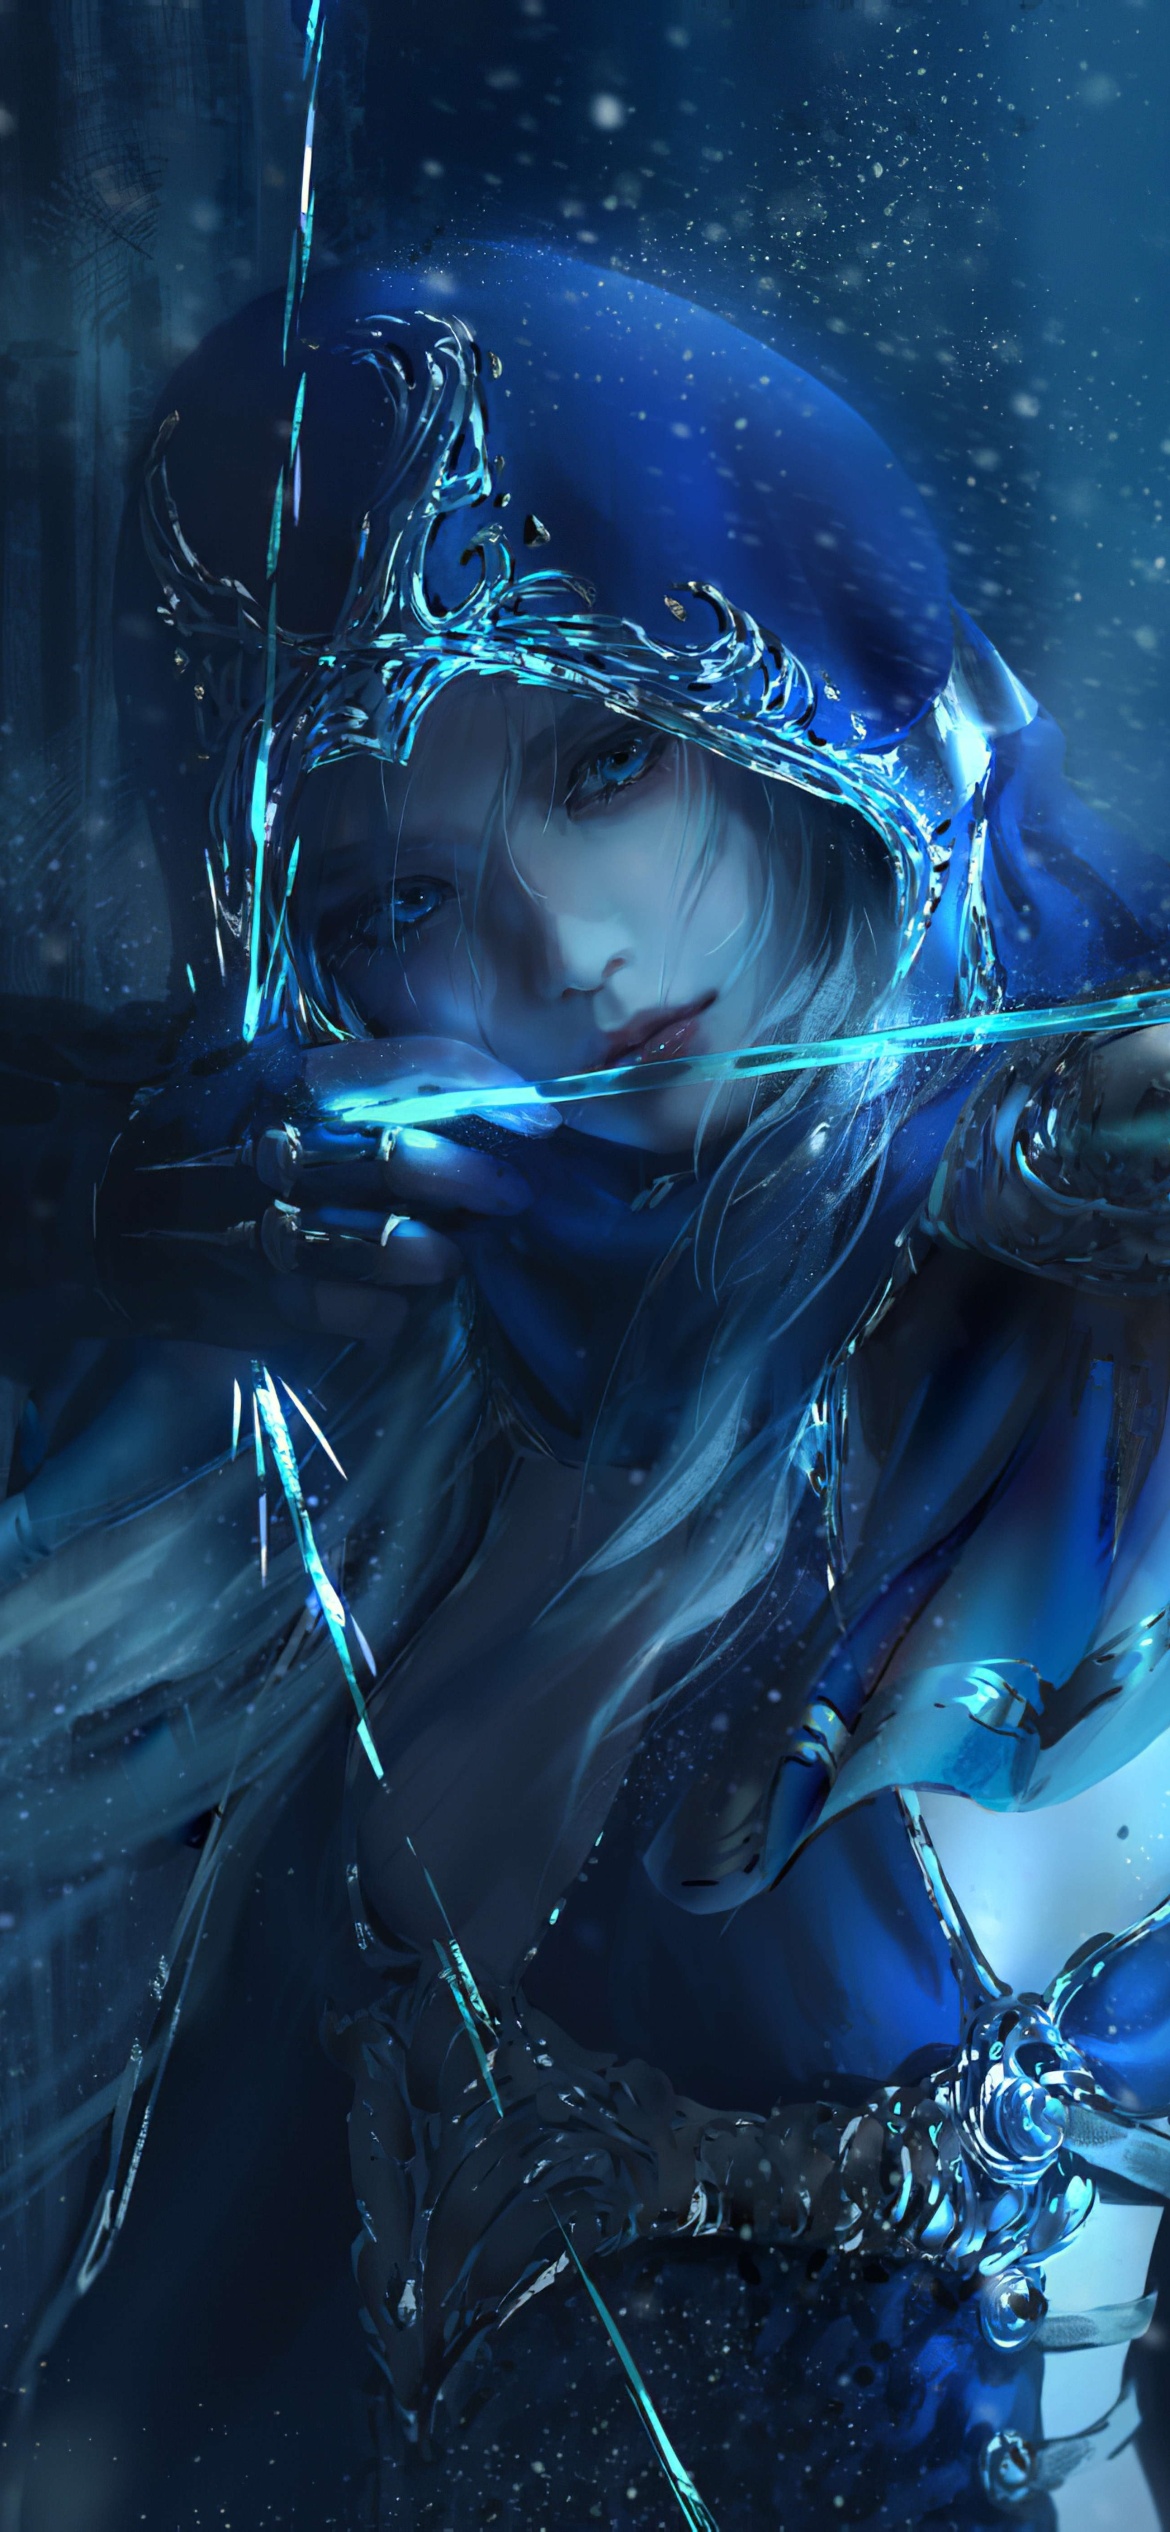 Mobile wallpapers, League of Legends, Gaming, Free backgrounds, 1170x2540 HD Handy